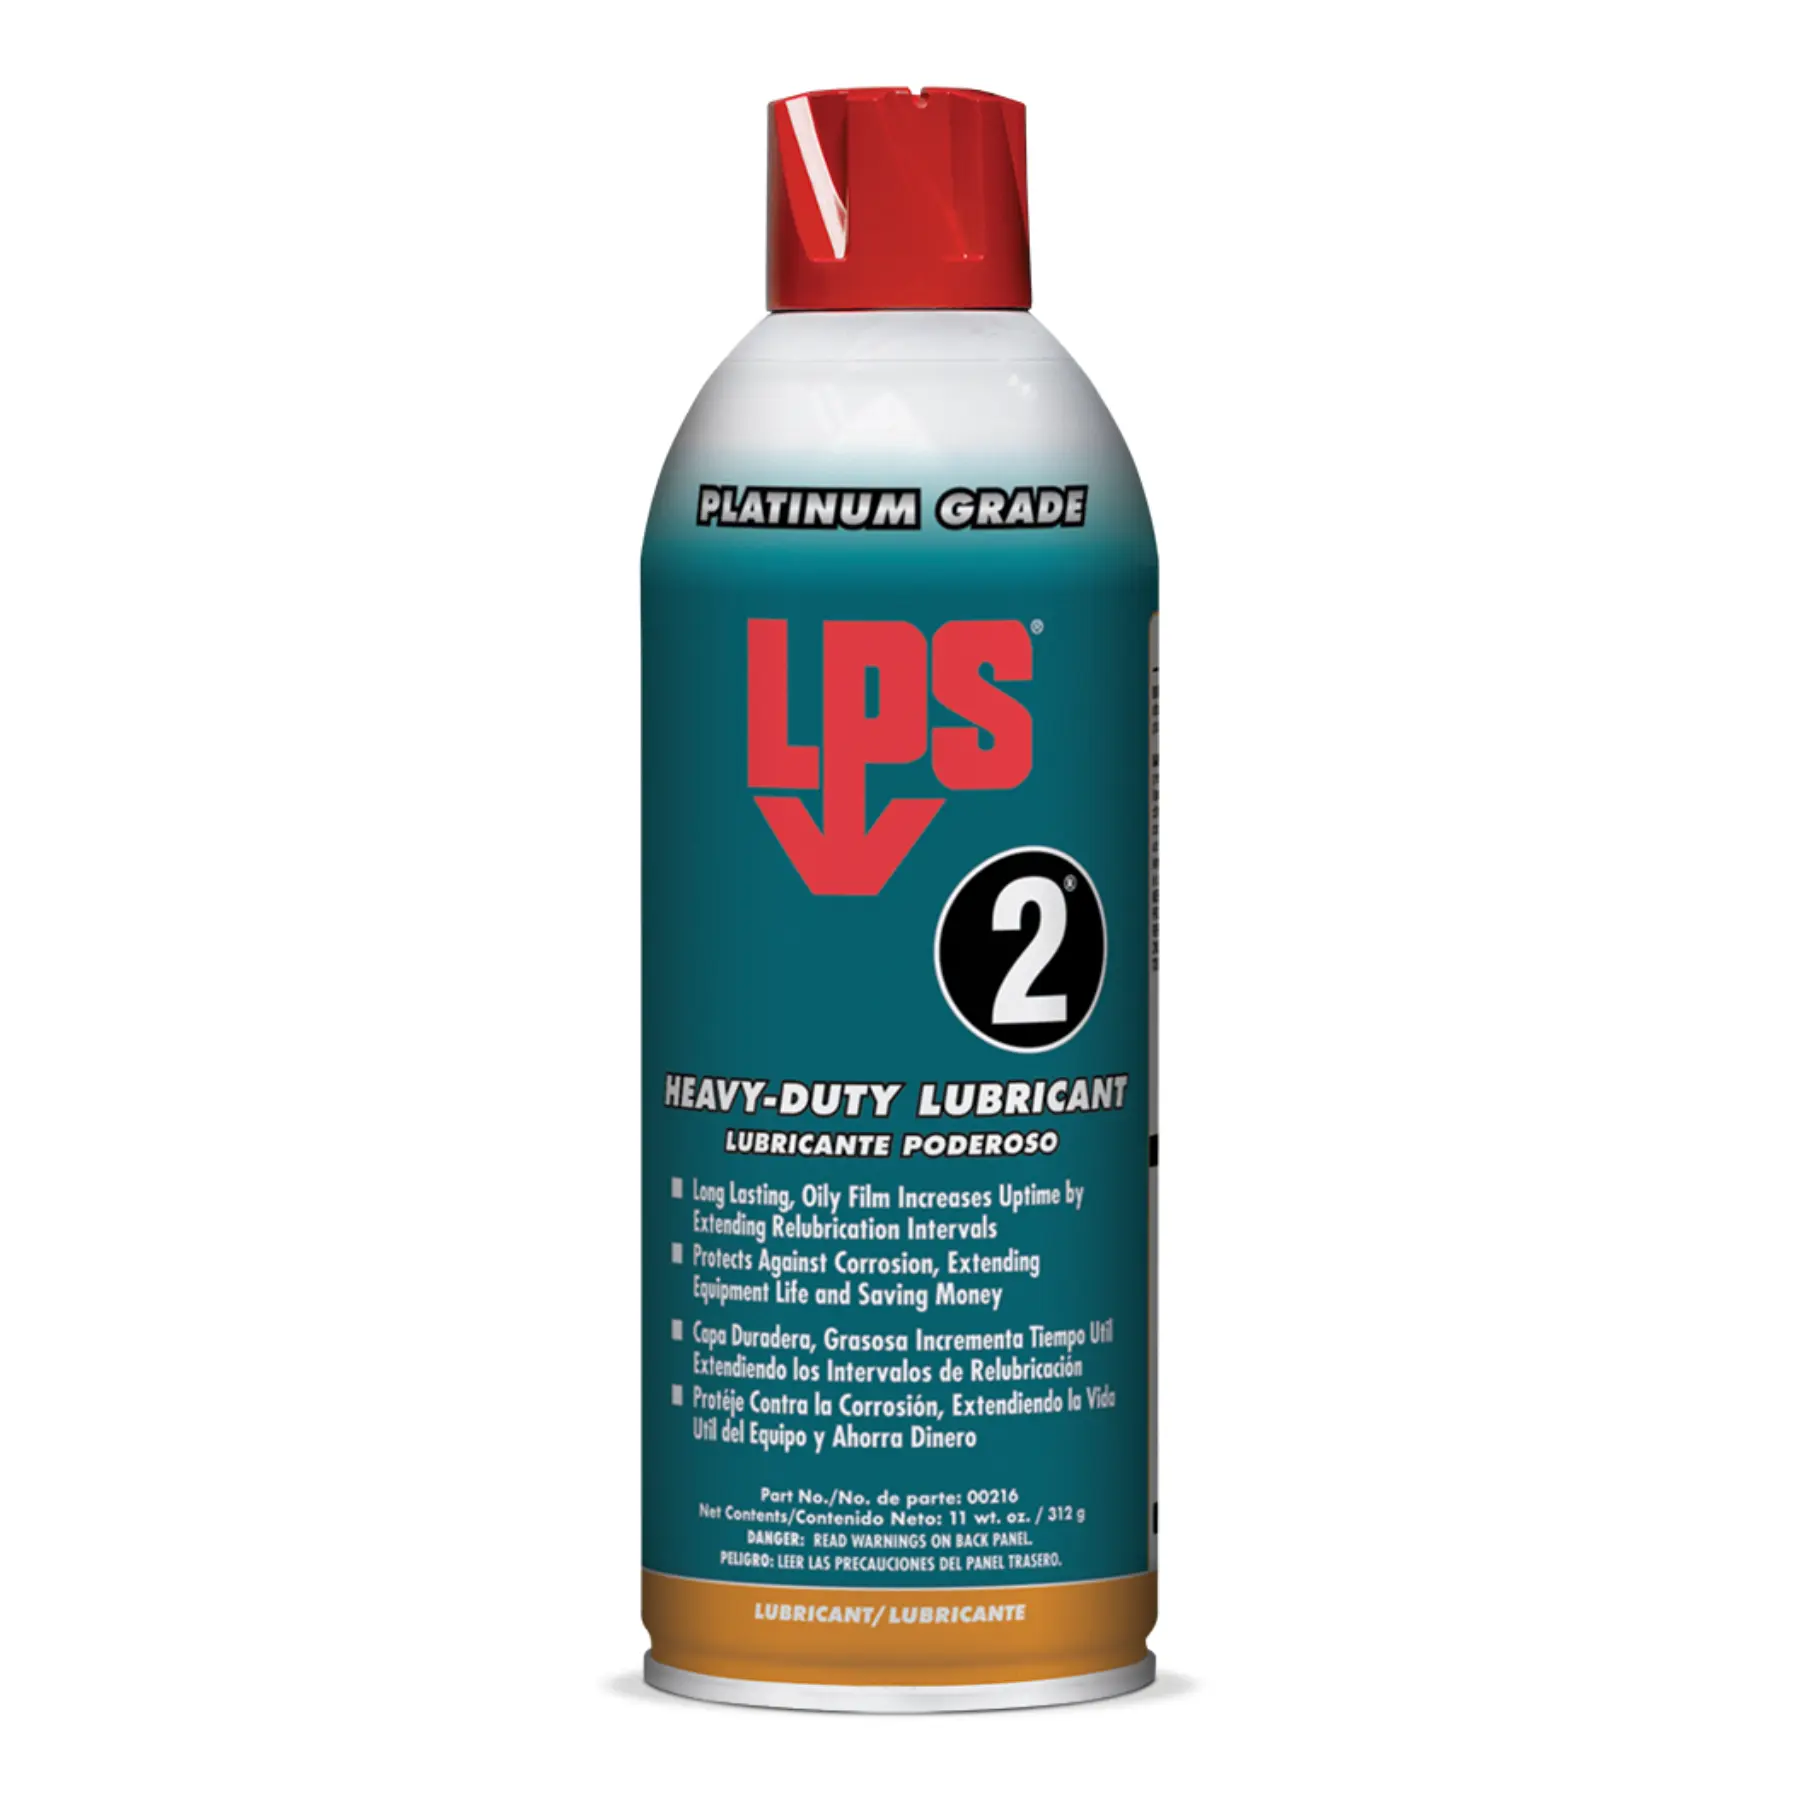 LPS 2 HEAVY-DUTY LUBRICANT 00216